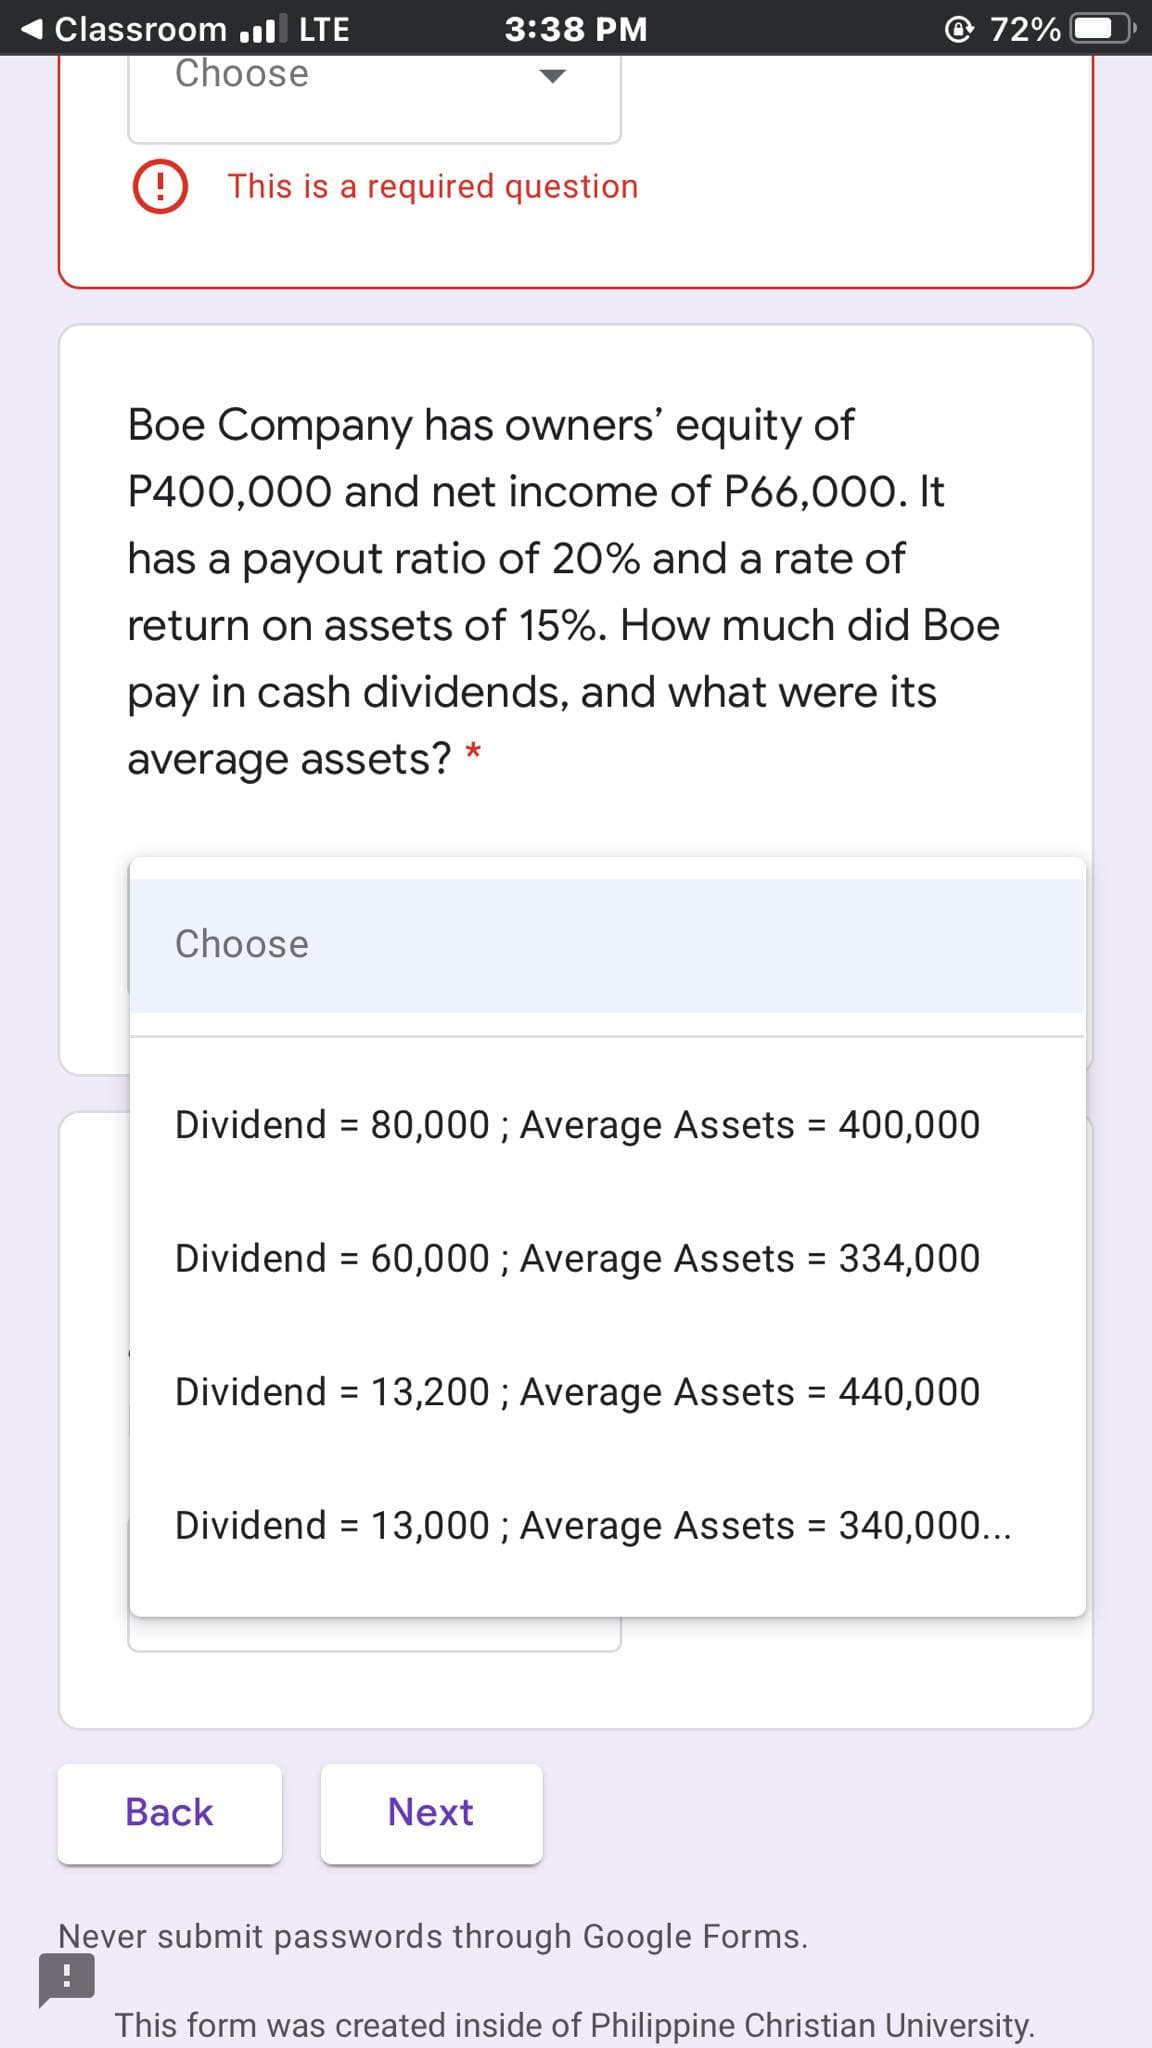 Classroom .ıl LTE
3:38 PM
72%
Choose
This is a required question
Boe Company has owners' equity of
P400,000 and net income of P66,000. It
has a payout ratio of 20% and a rate of
return on assets of 15%. How much did Boe
pay in cash dividends, and what were its
average assets?
Choose
Dividend = 80,000 ; Average Assets = 400,000
%3D
Dividend = 60,000 ; Average Assets = 334,000
%3D
%3D
Dividend = 13,200 ; Average Assets = 440,000
Dividend = 13,000 ; Average Assets = 340,00...
Back
Next
Never submit passwords through Google Forms.
This form was created inside of Philippine Christian University.
